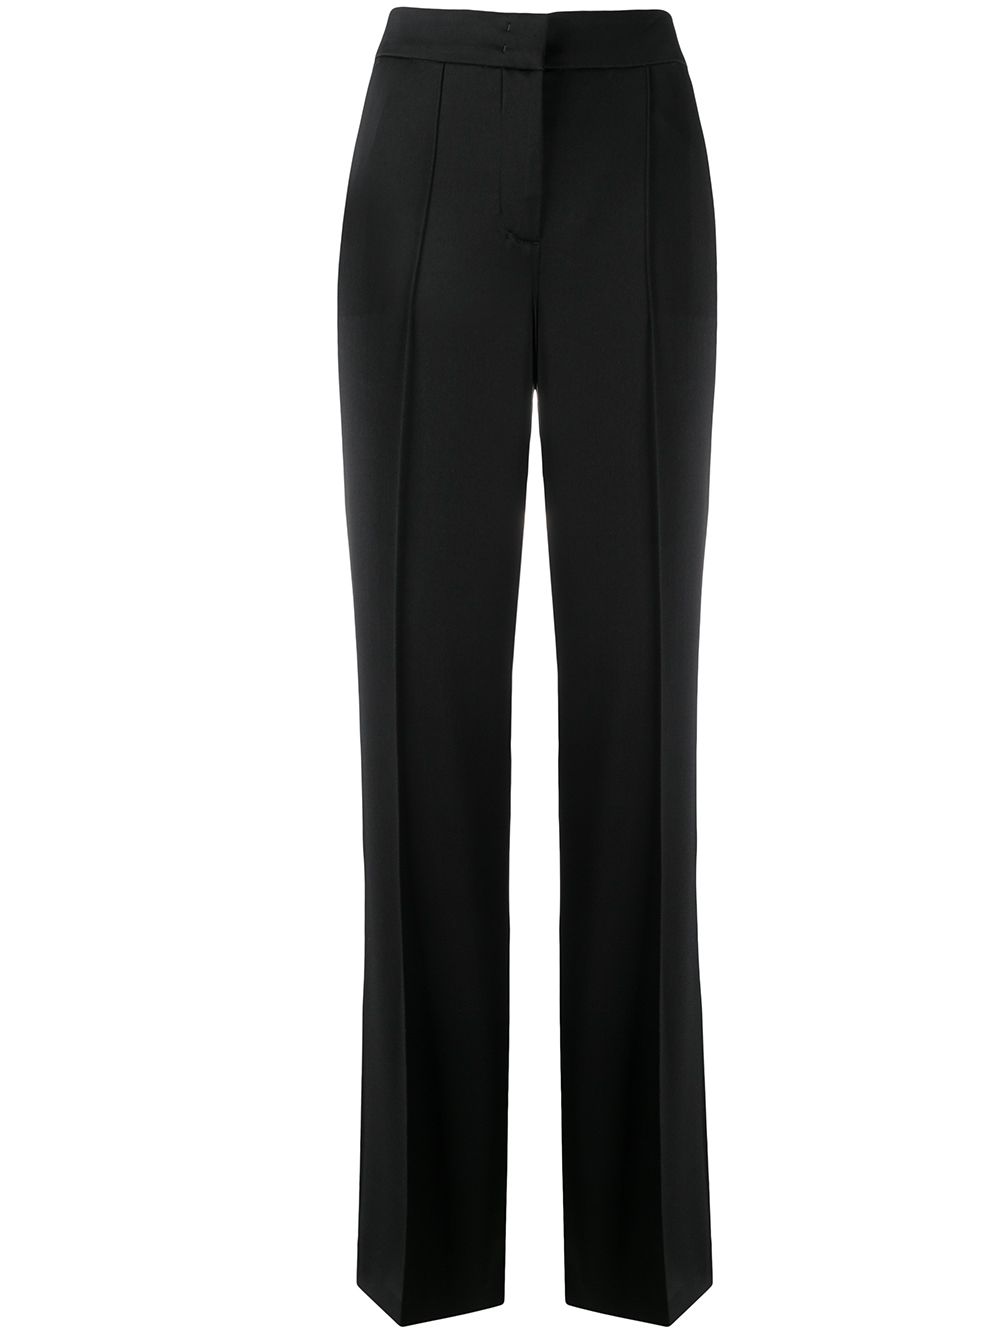 black and white trouser suit